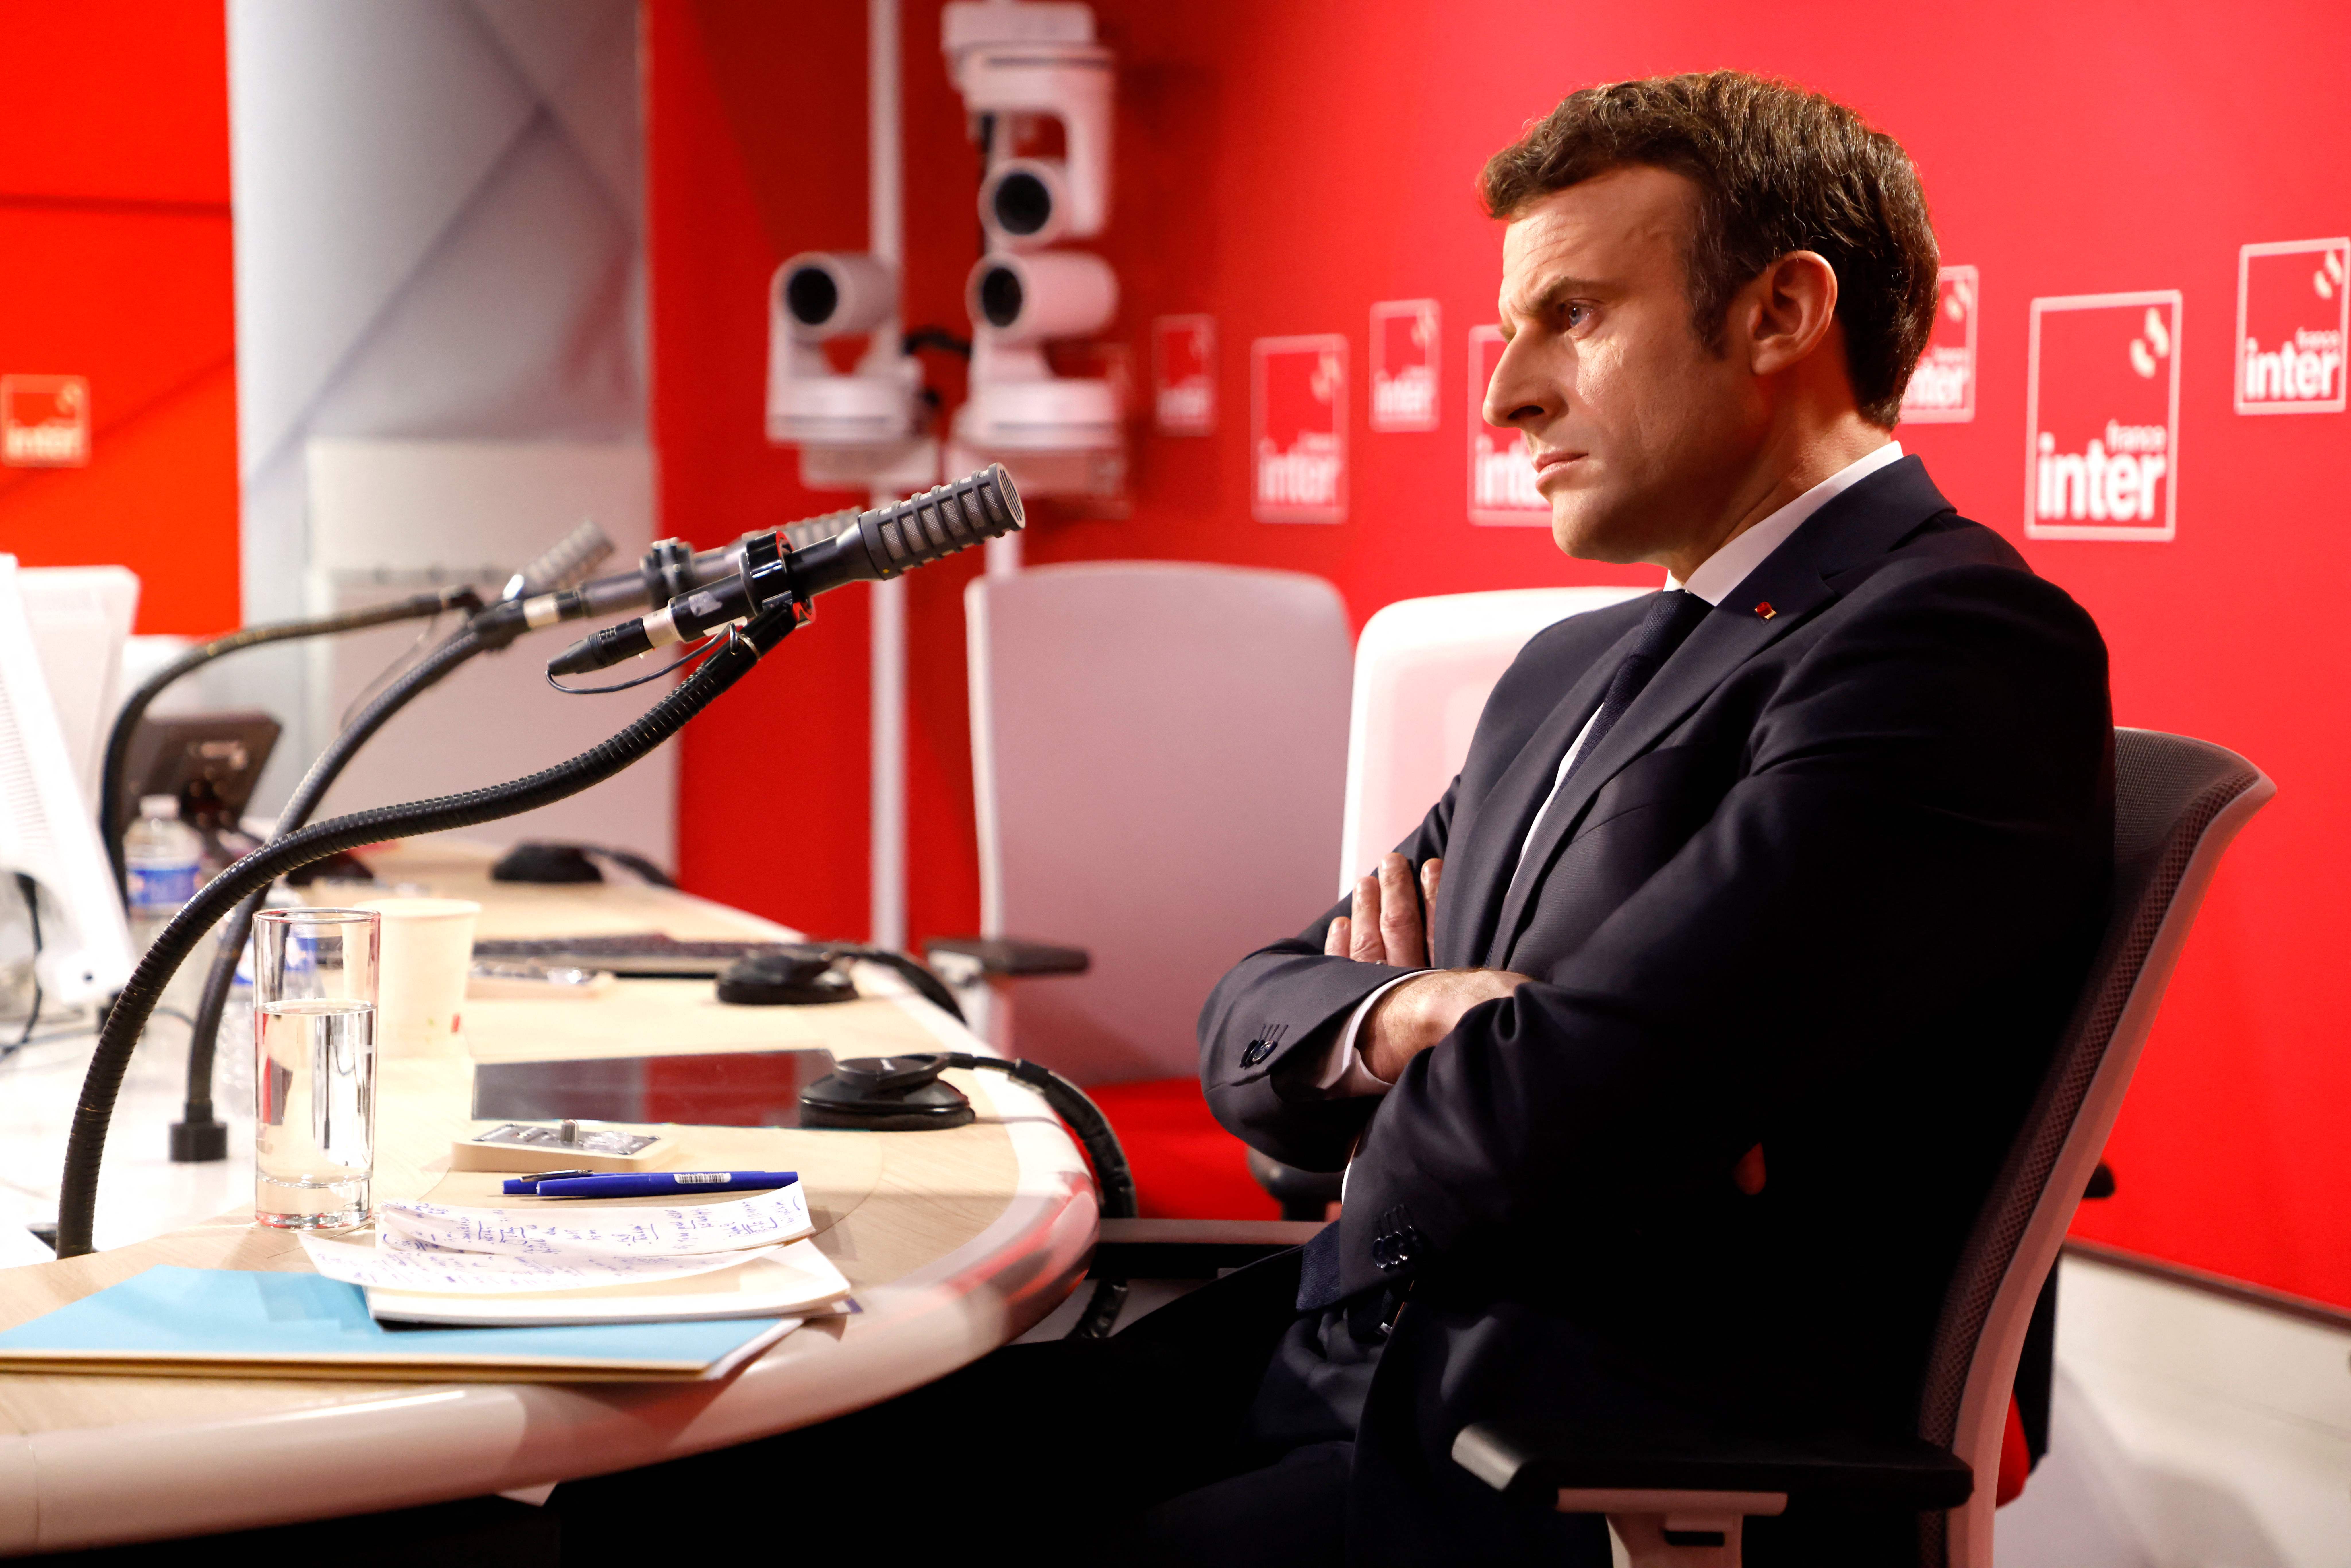 French President Emmanuel Macron attends the France Inter 7/9 radio broadcast at the Maison de la Radio in Paris, France, on April 4.